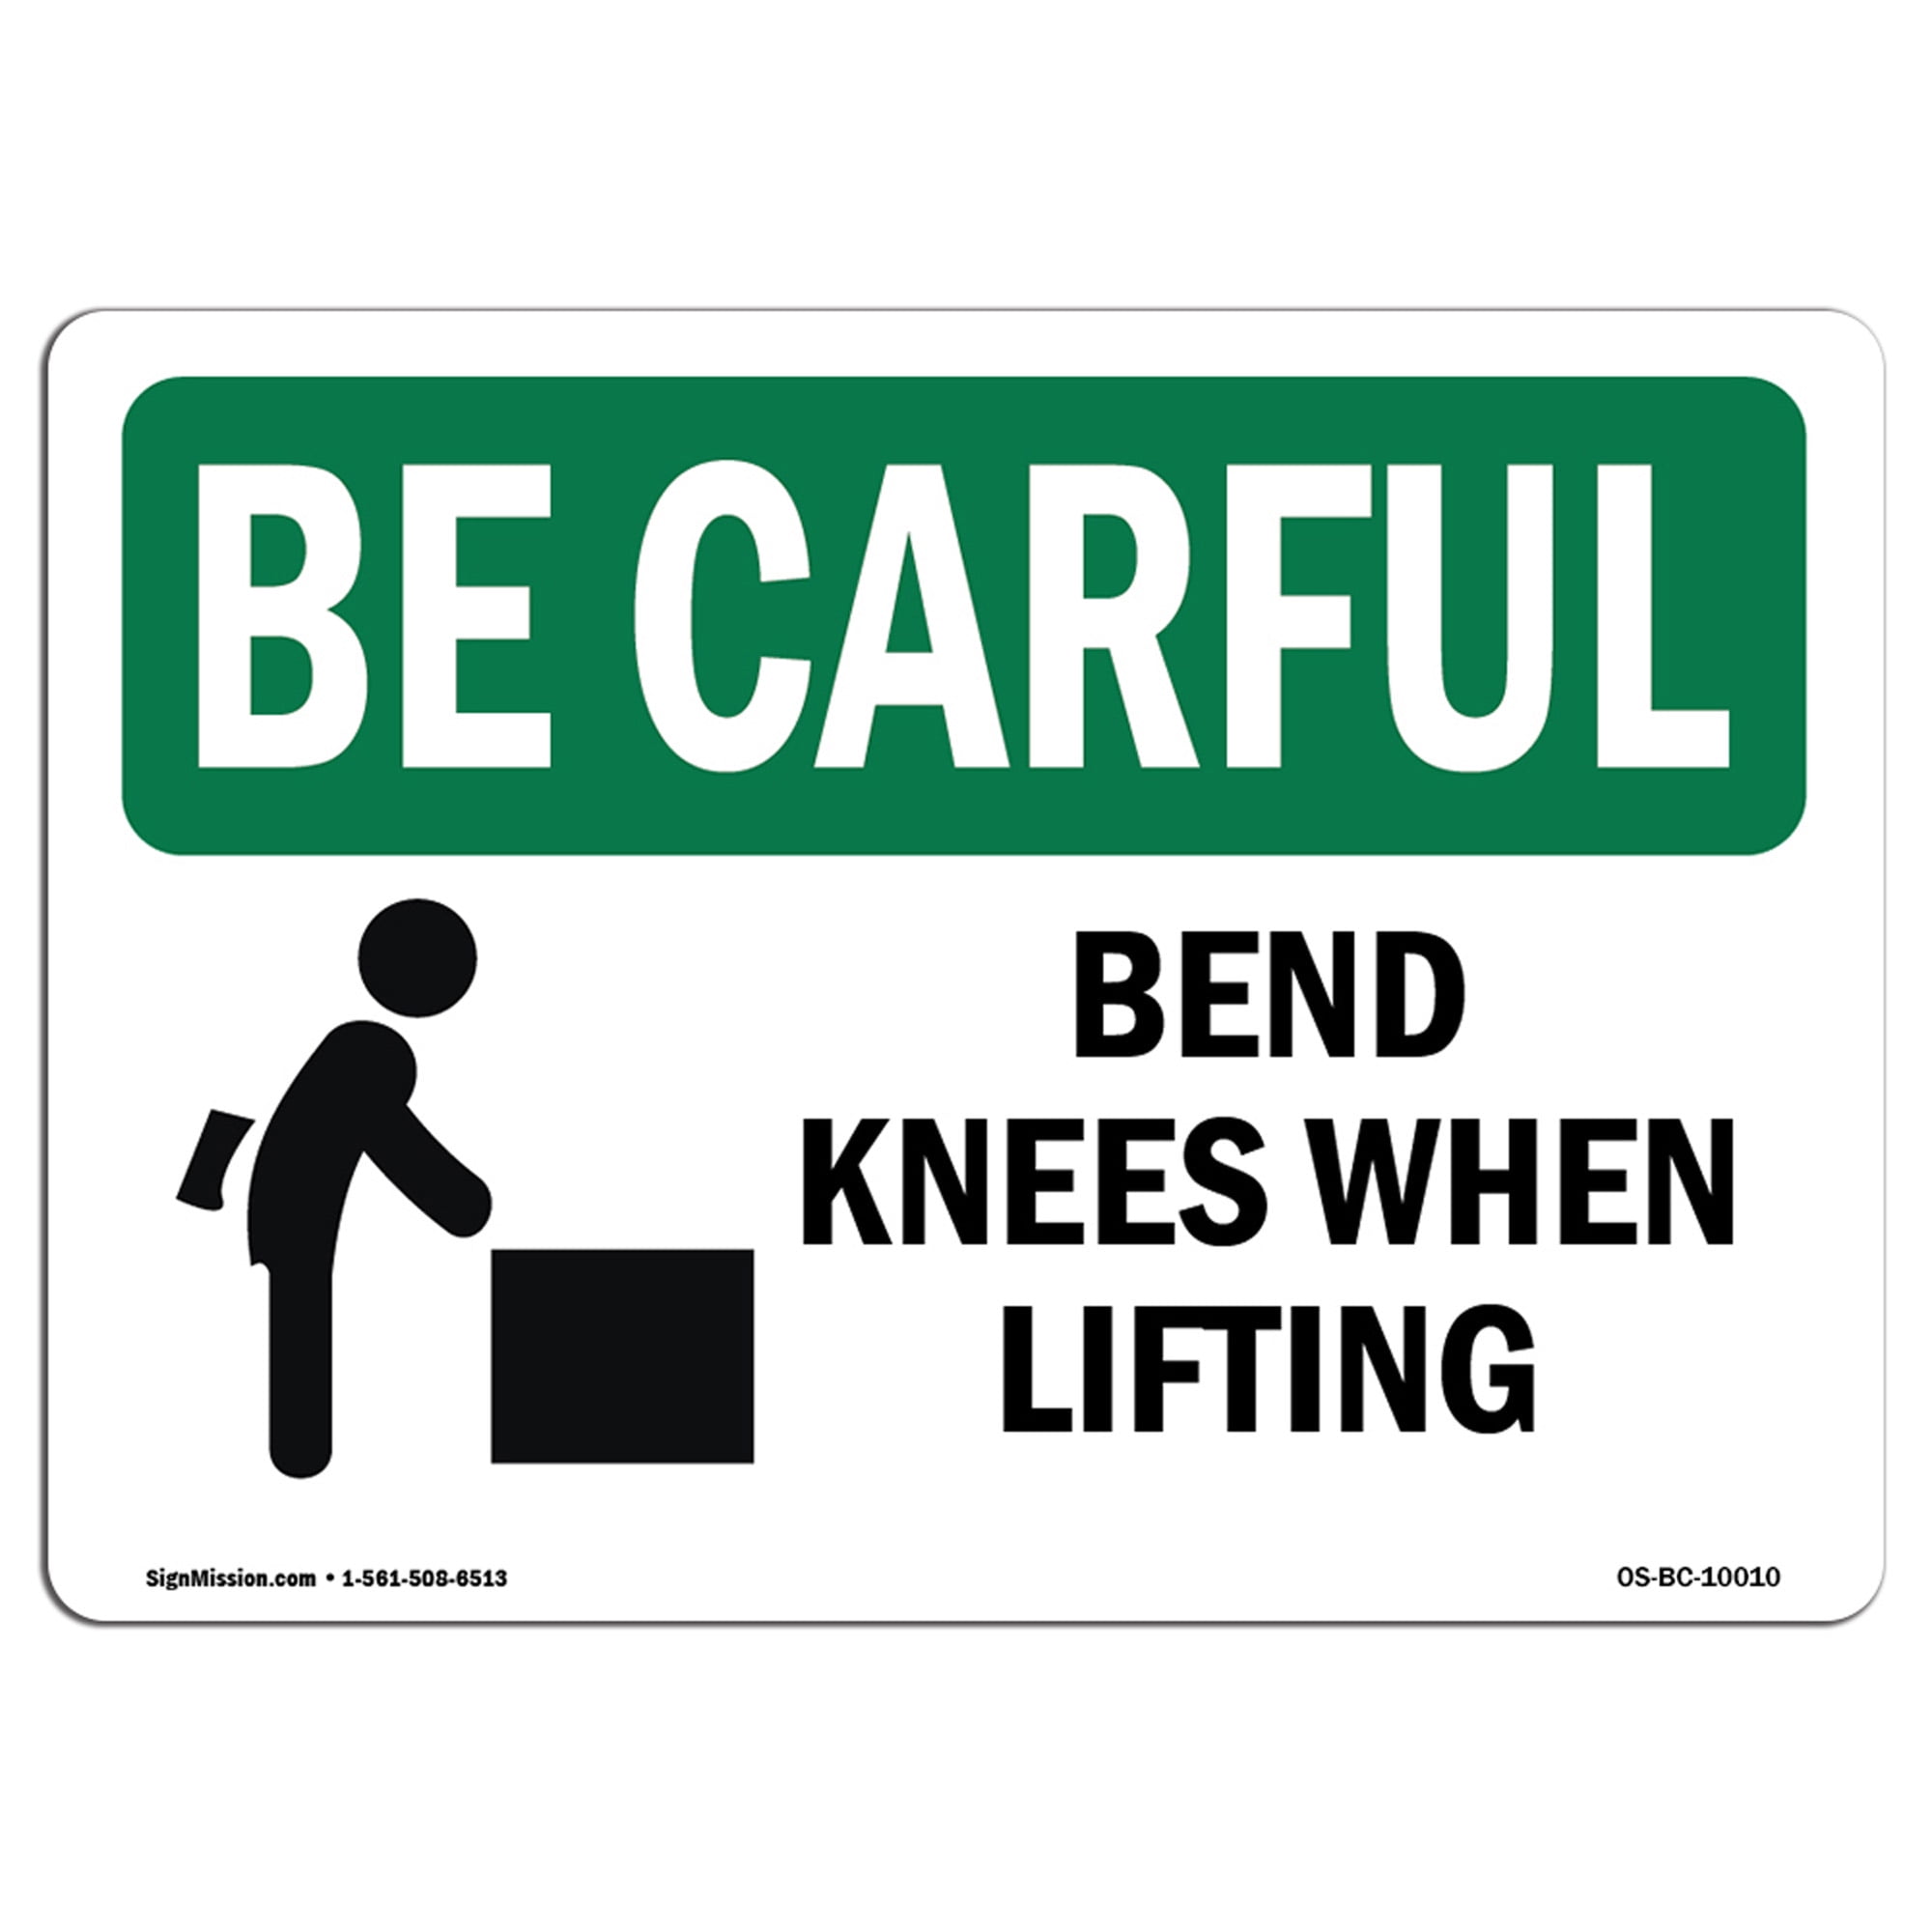 Be Carefeul Bend Knees When Lifting Print Bright Yellow Black Safety Notice Picture Poster Office Business Sign 